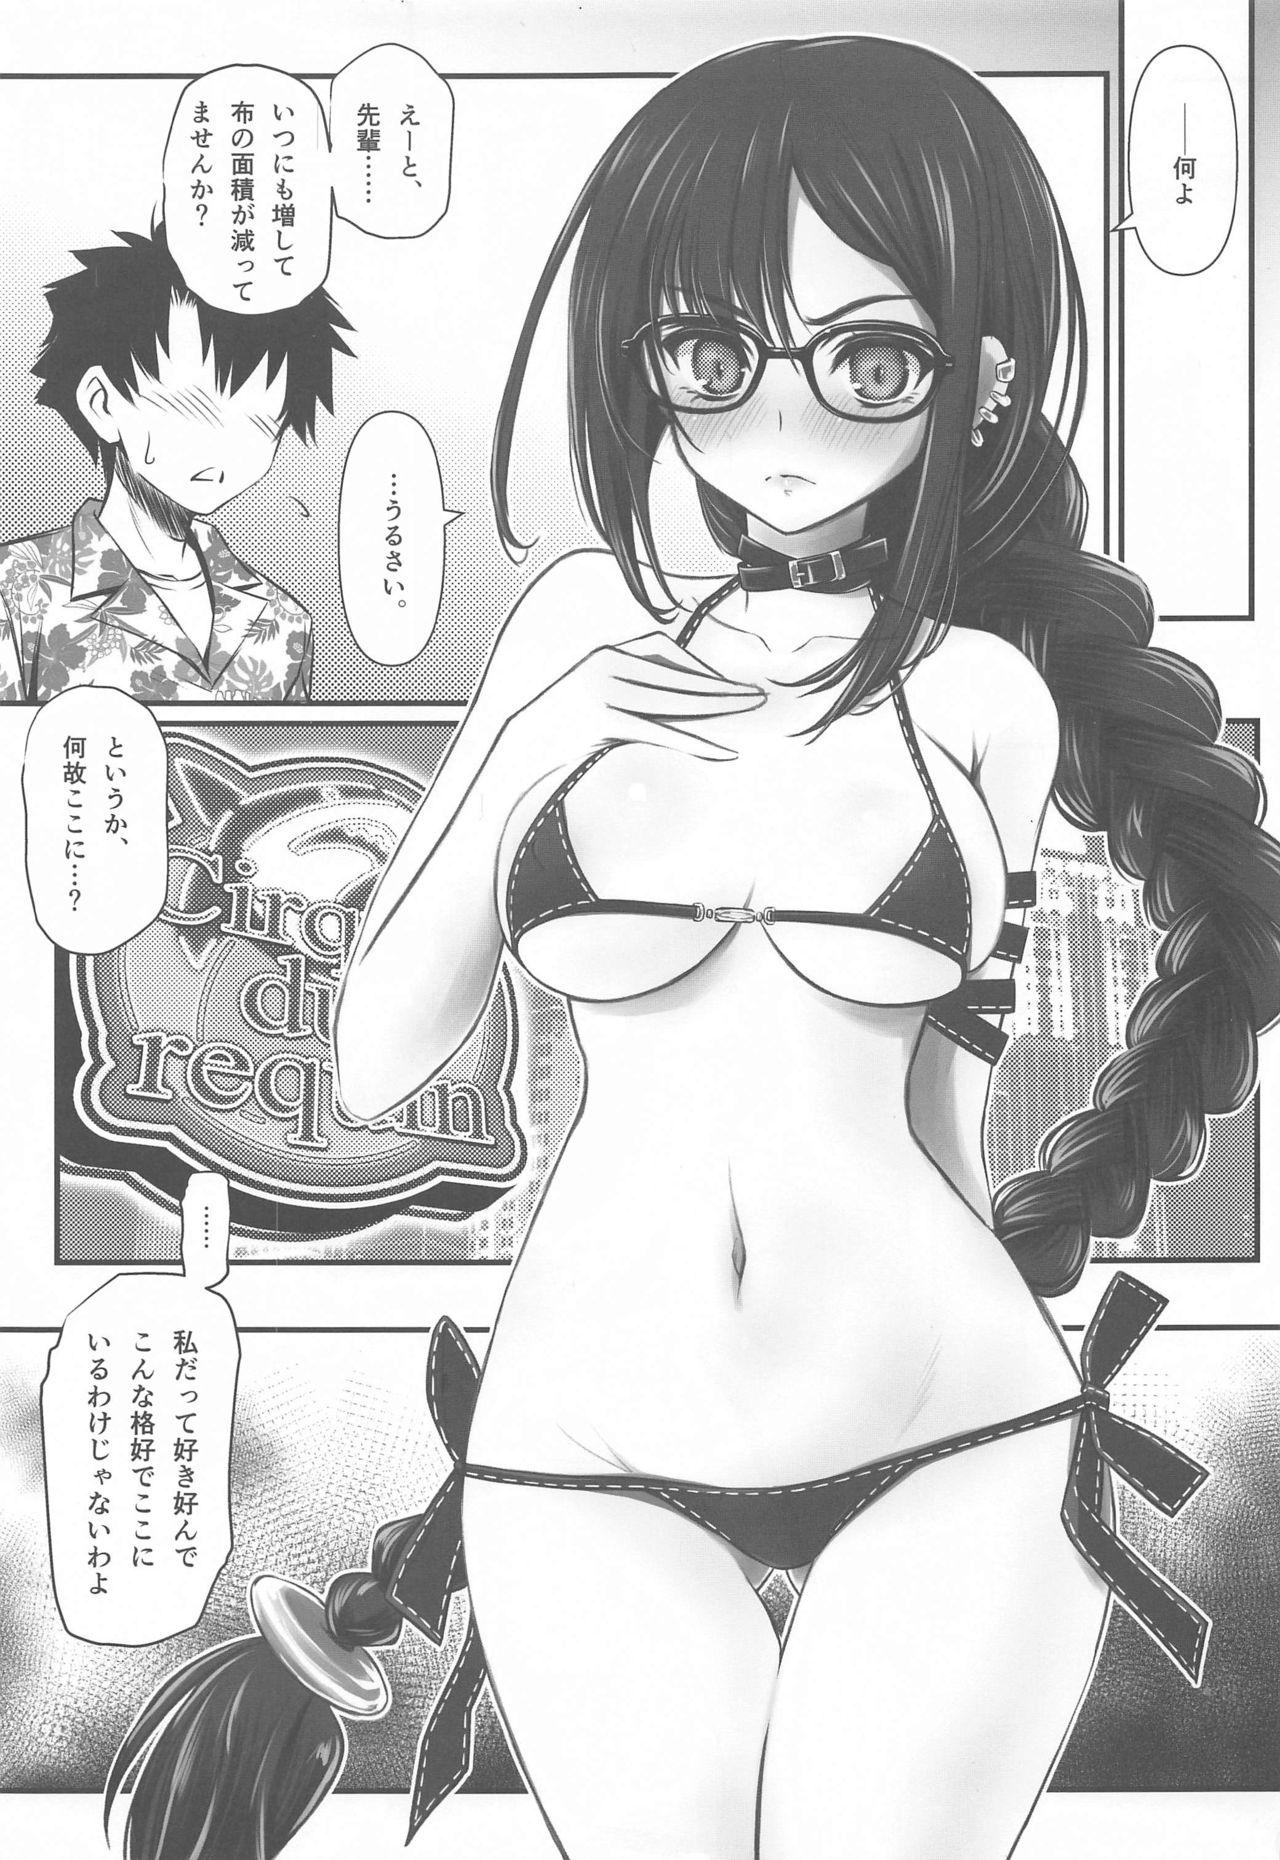 Work [Yakan Honpo (Inoue Tommy)] Megane Senpai Onee-chan - FGO Cute Glasses Sister(s) (Fate/Grand Order) - Fate grand order Passionate - Page 2